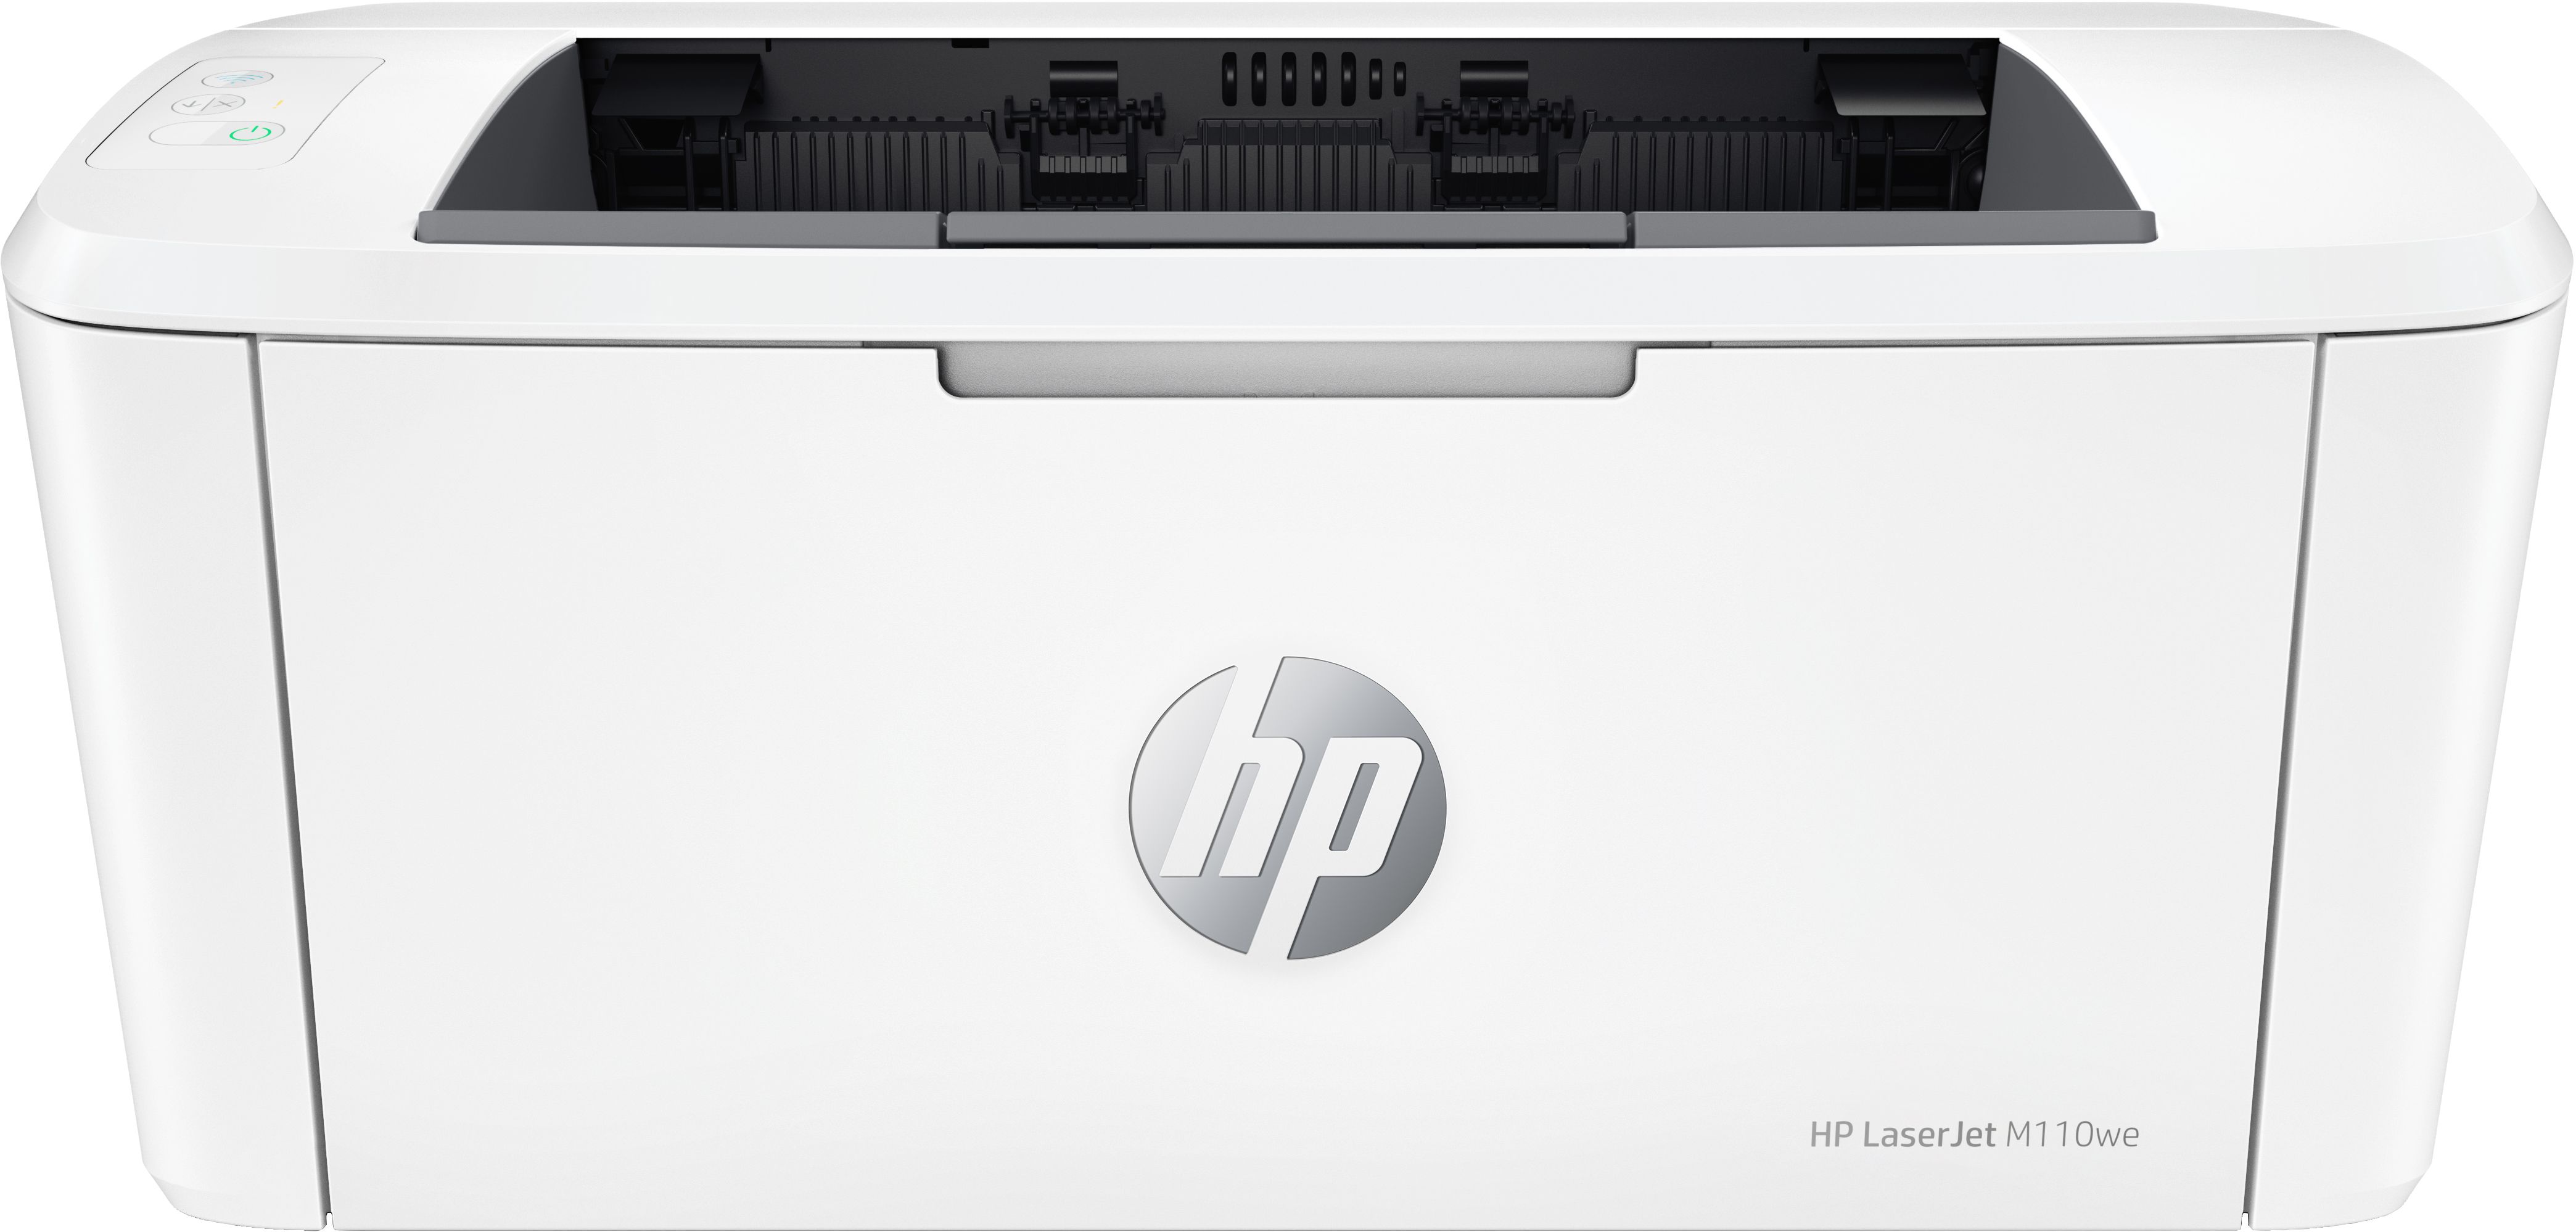 HP LaserJet M110we Printer, Black and white, Printer for Small office, Print, Wireless; +; Instant Ink eligible_1